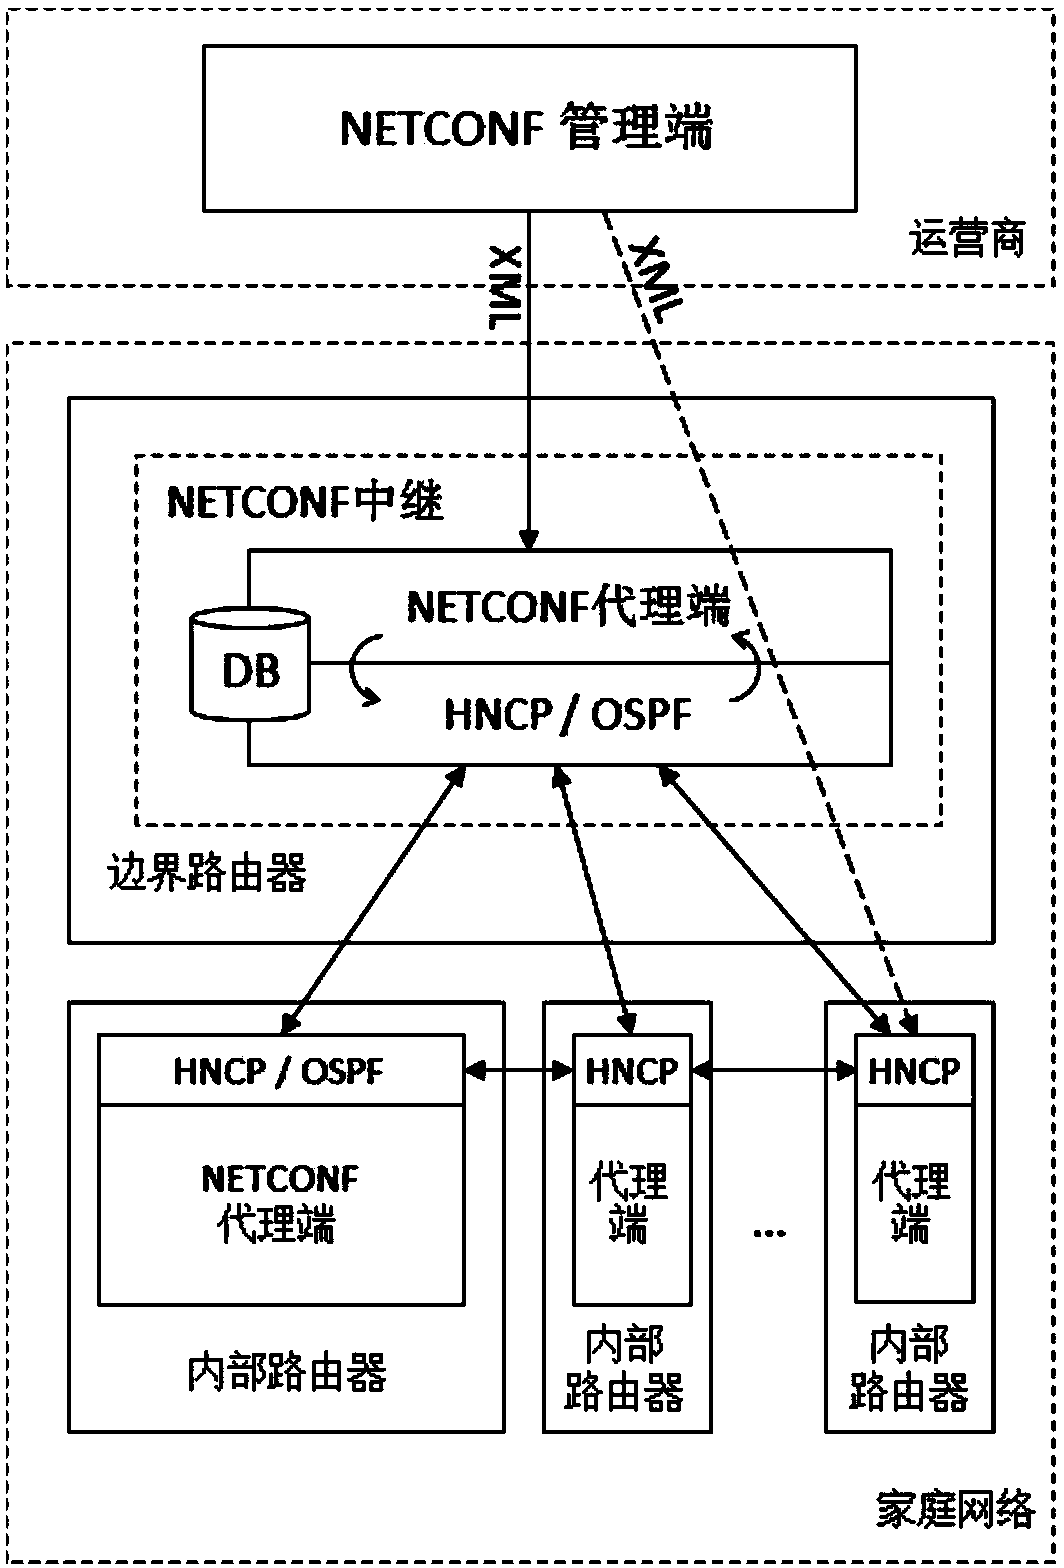 Home network management method based on network configuration protocol (NETCONF) relay